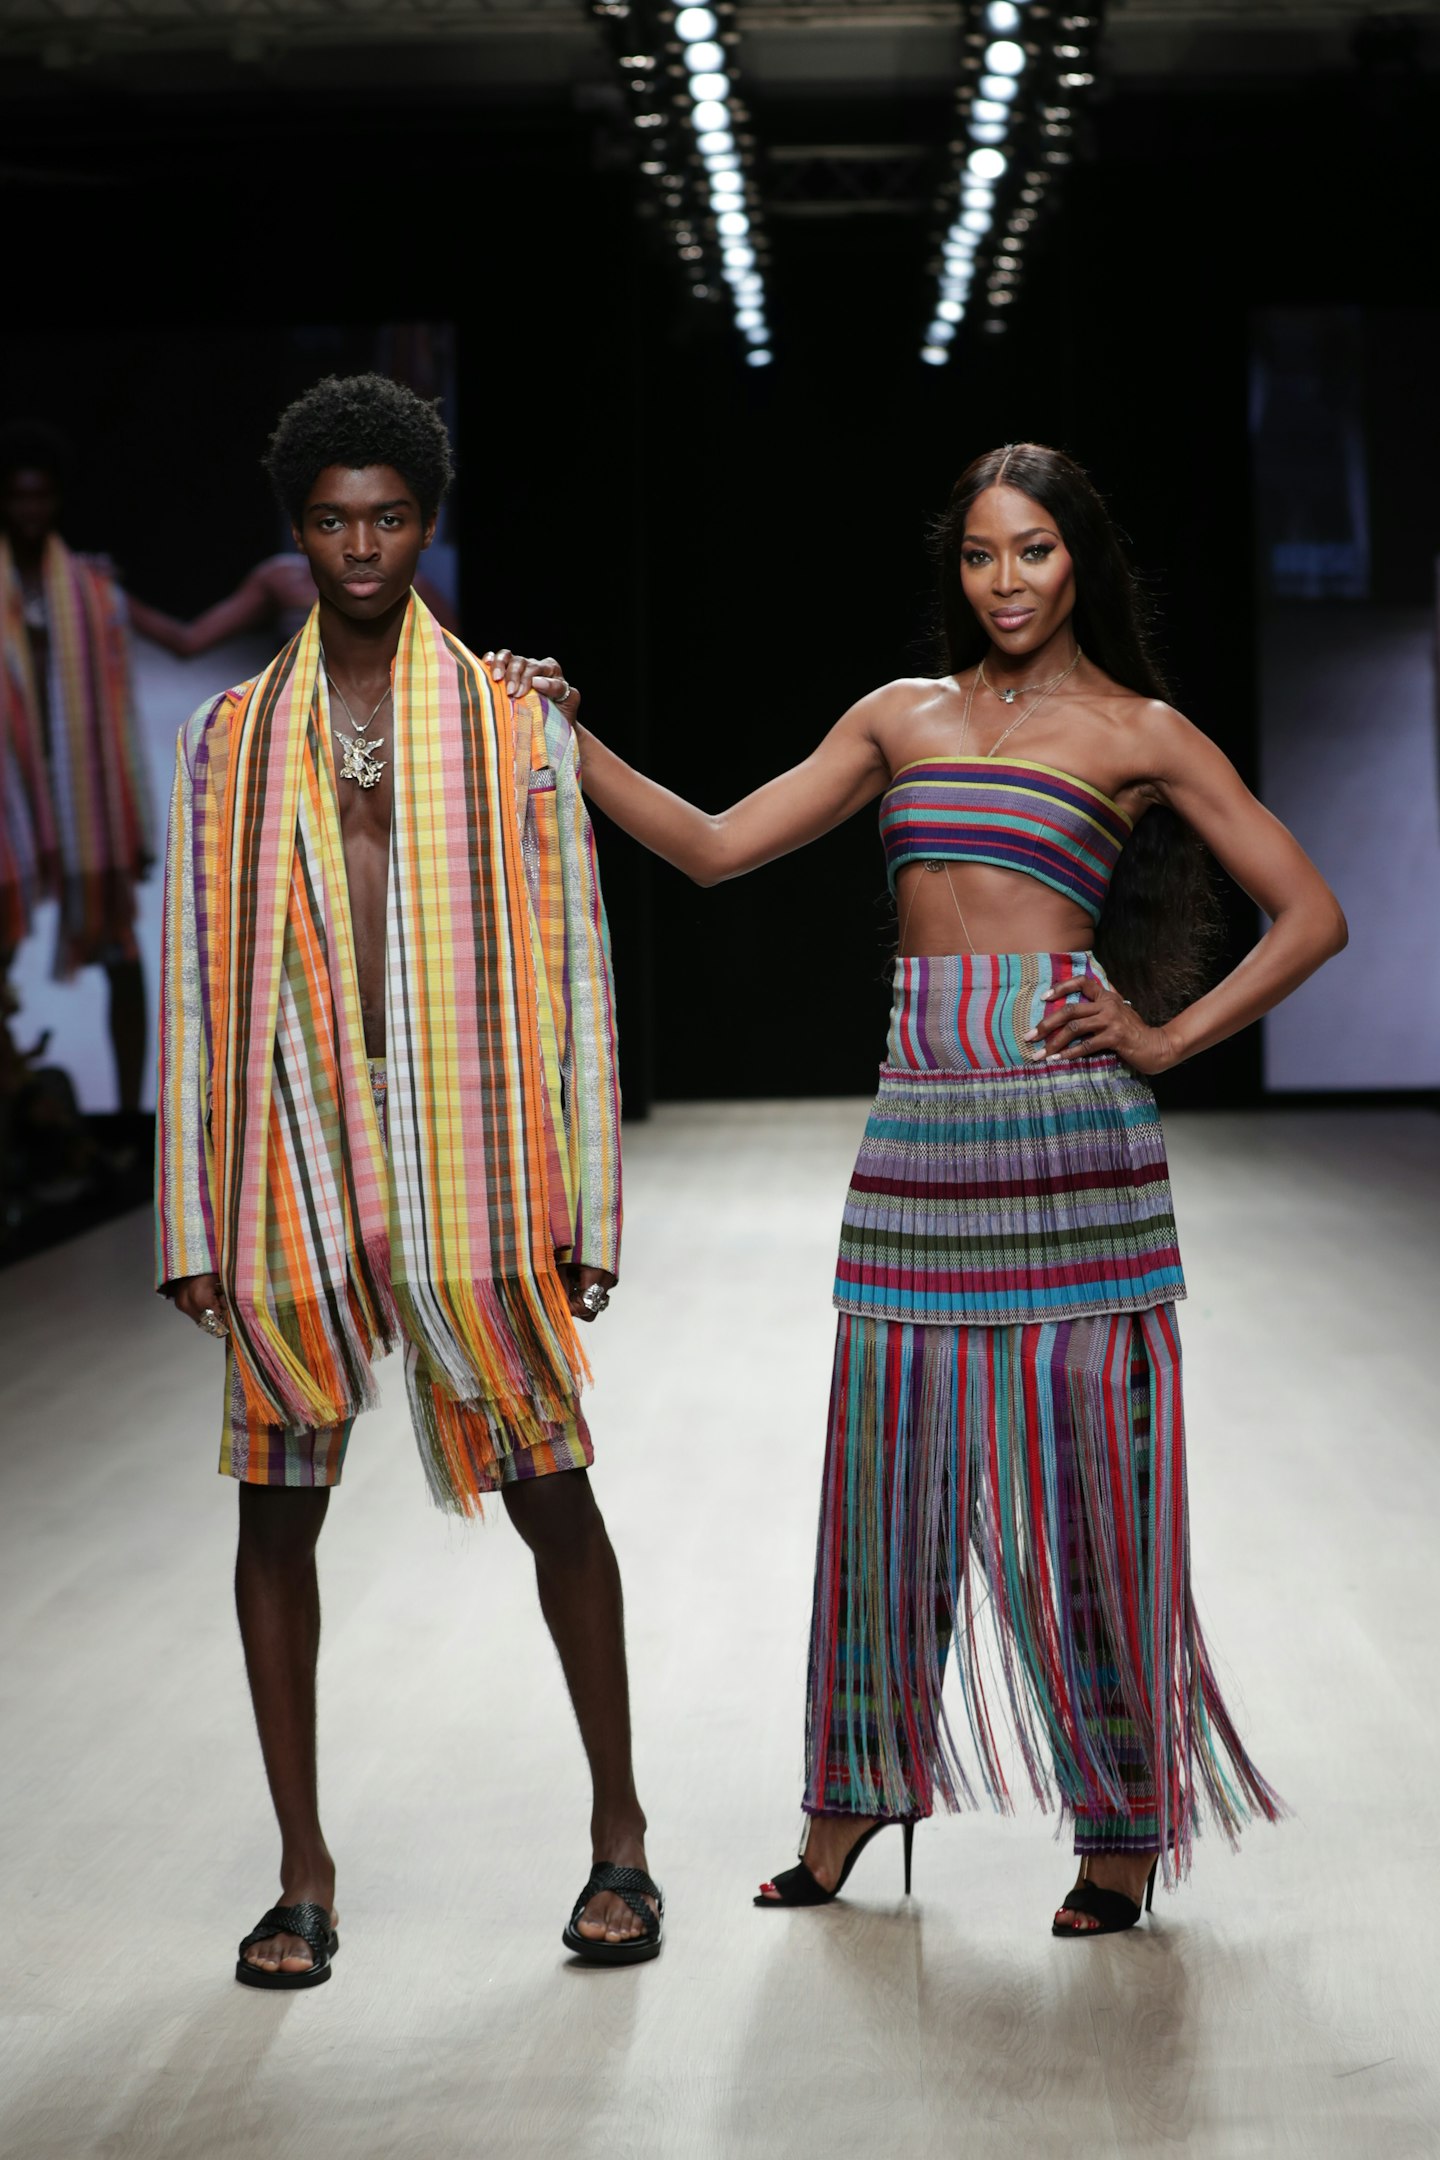 Alton Mason and Naomi Campbell walking the runway for Kenneth Ize at Arise Fashion Week in Lagos, Nigeria